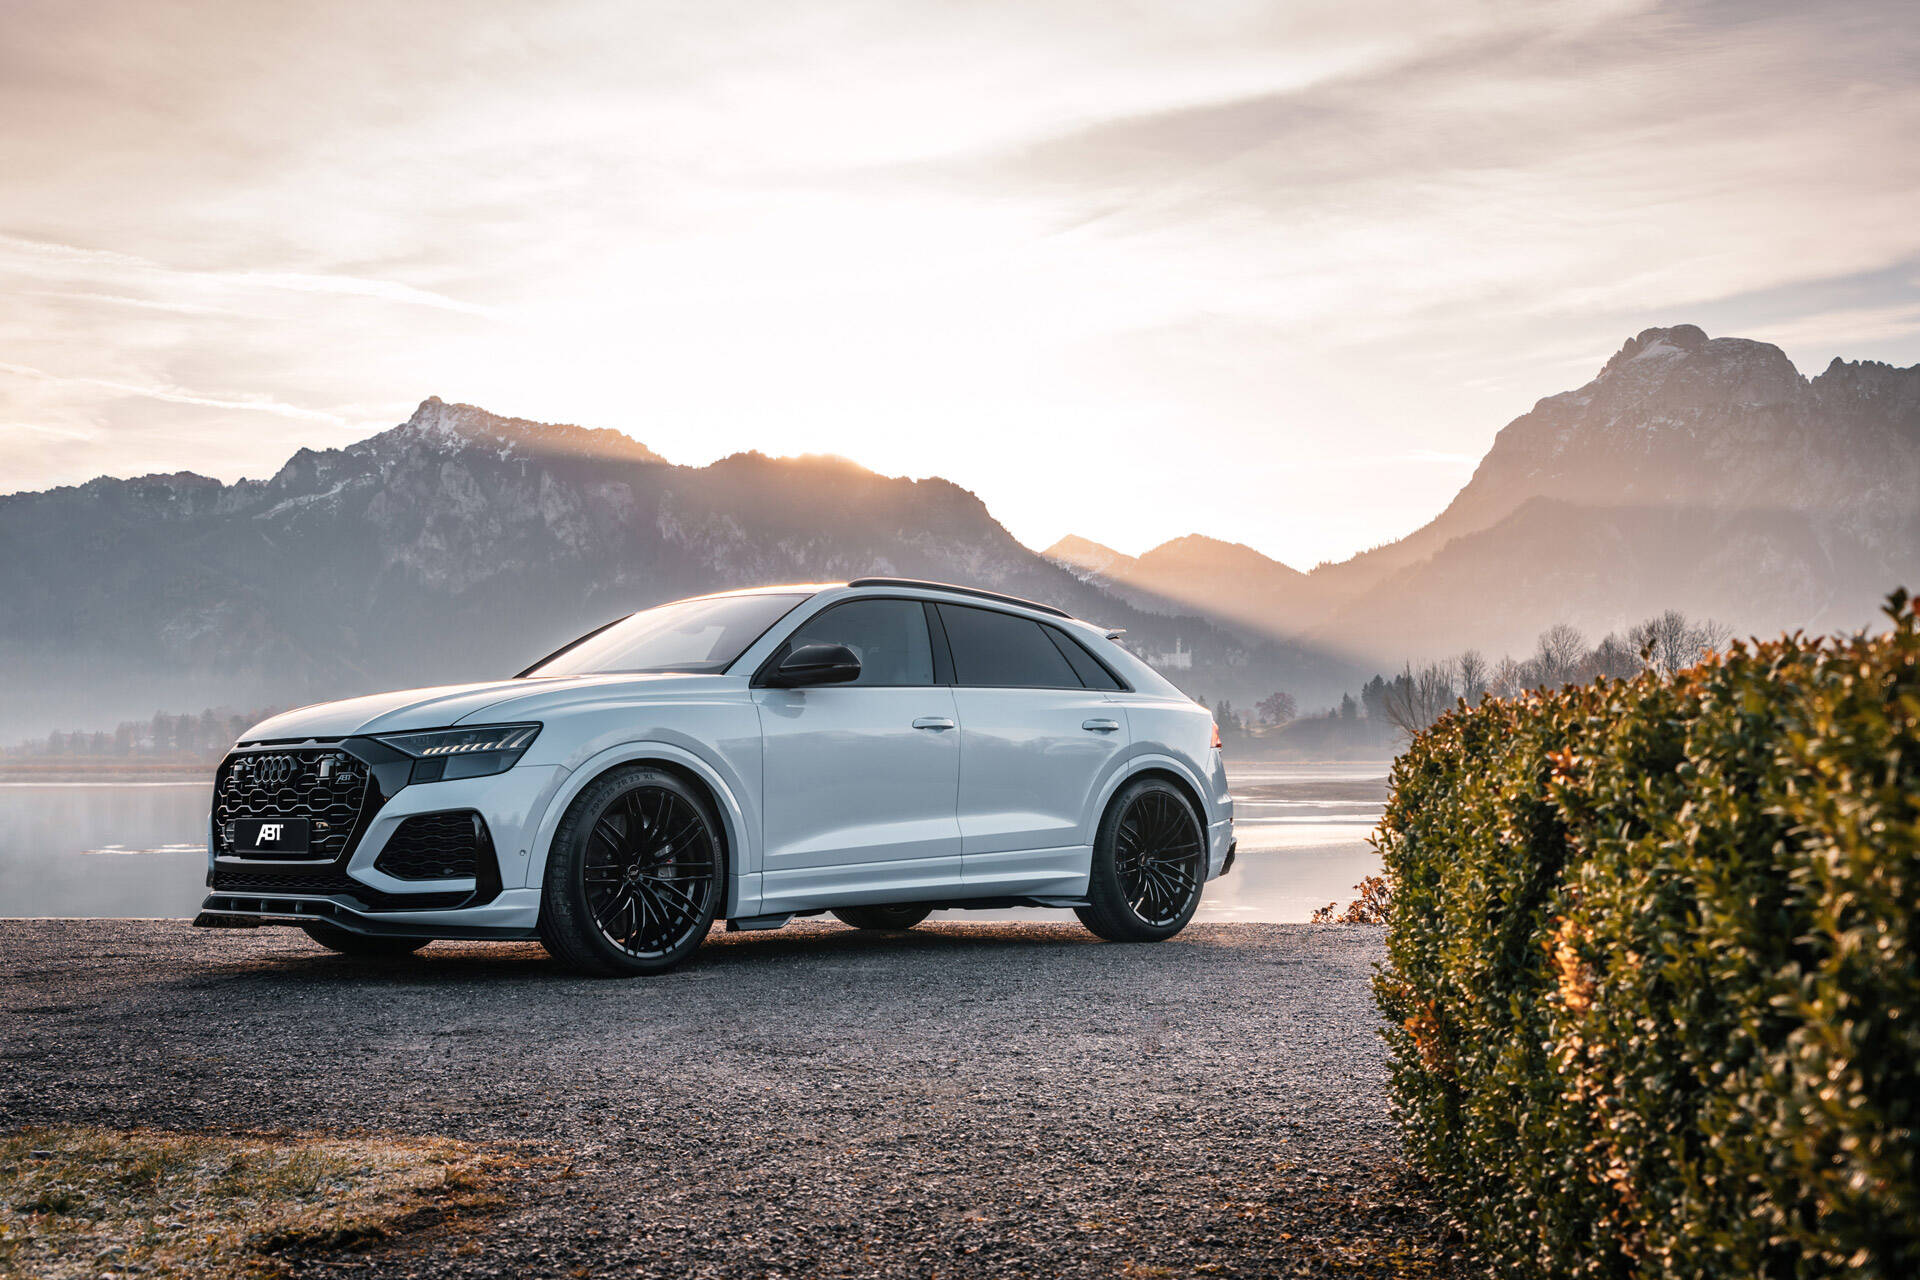 RS6-S and RSQ8-S - Aero packages with plenty of carbon fiber parts and up  to 690 HP - Audi Tuning, VW Tuning, Chiptuning von ABT Sportsline.